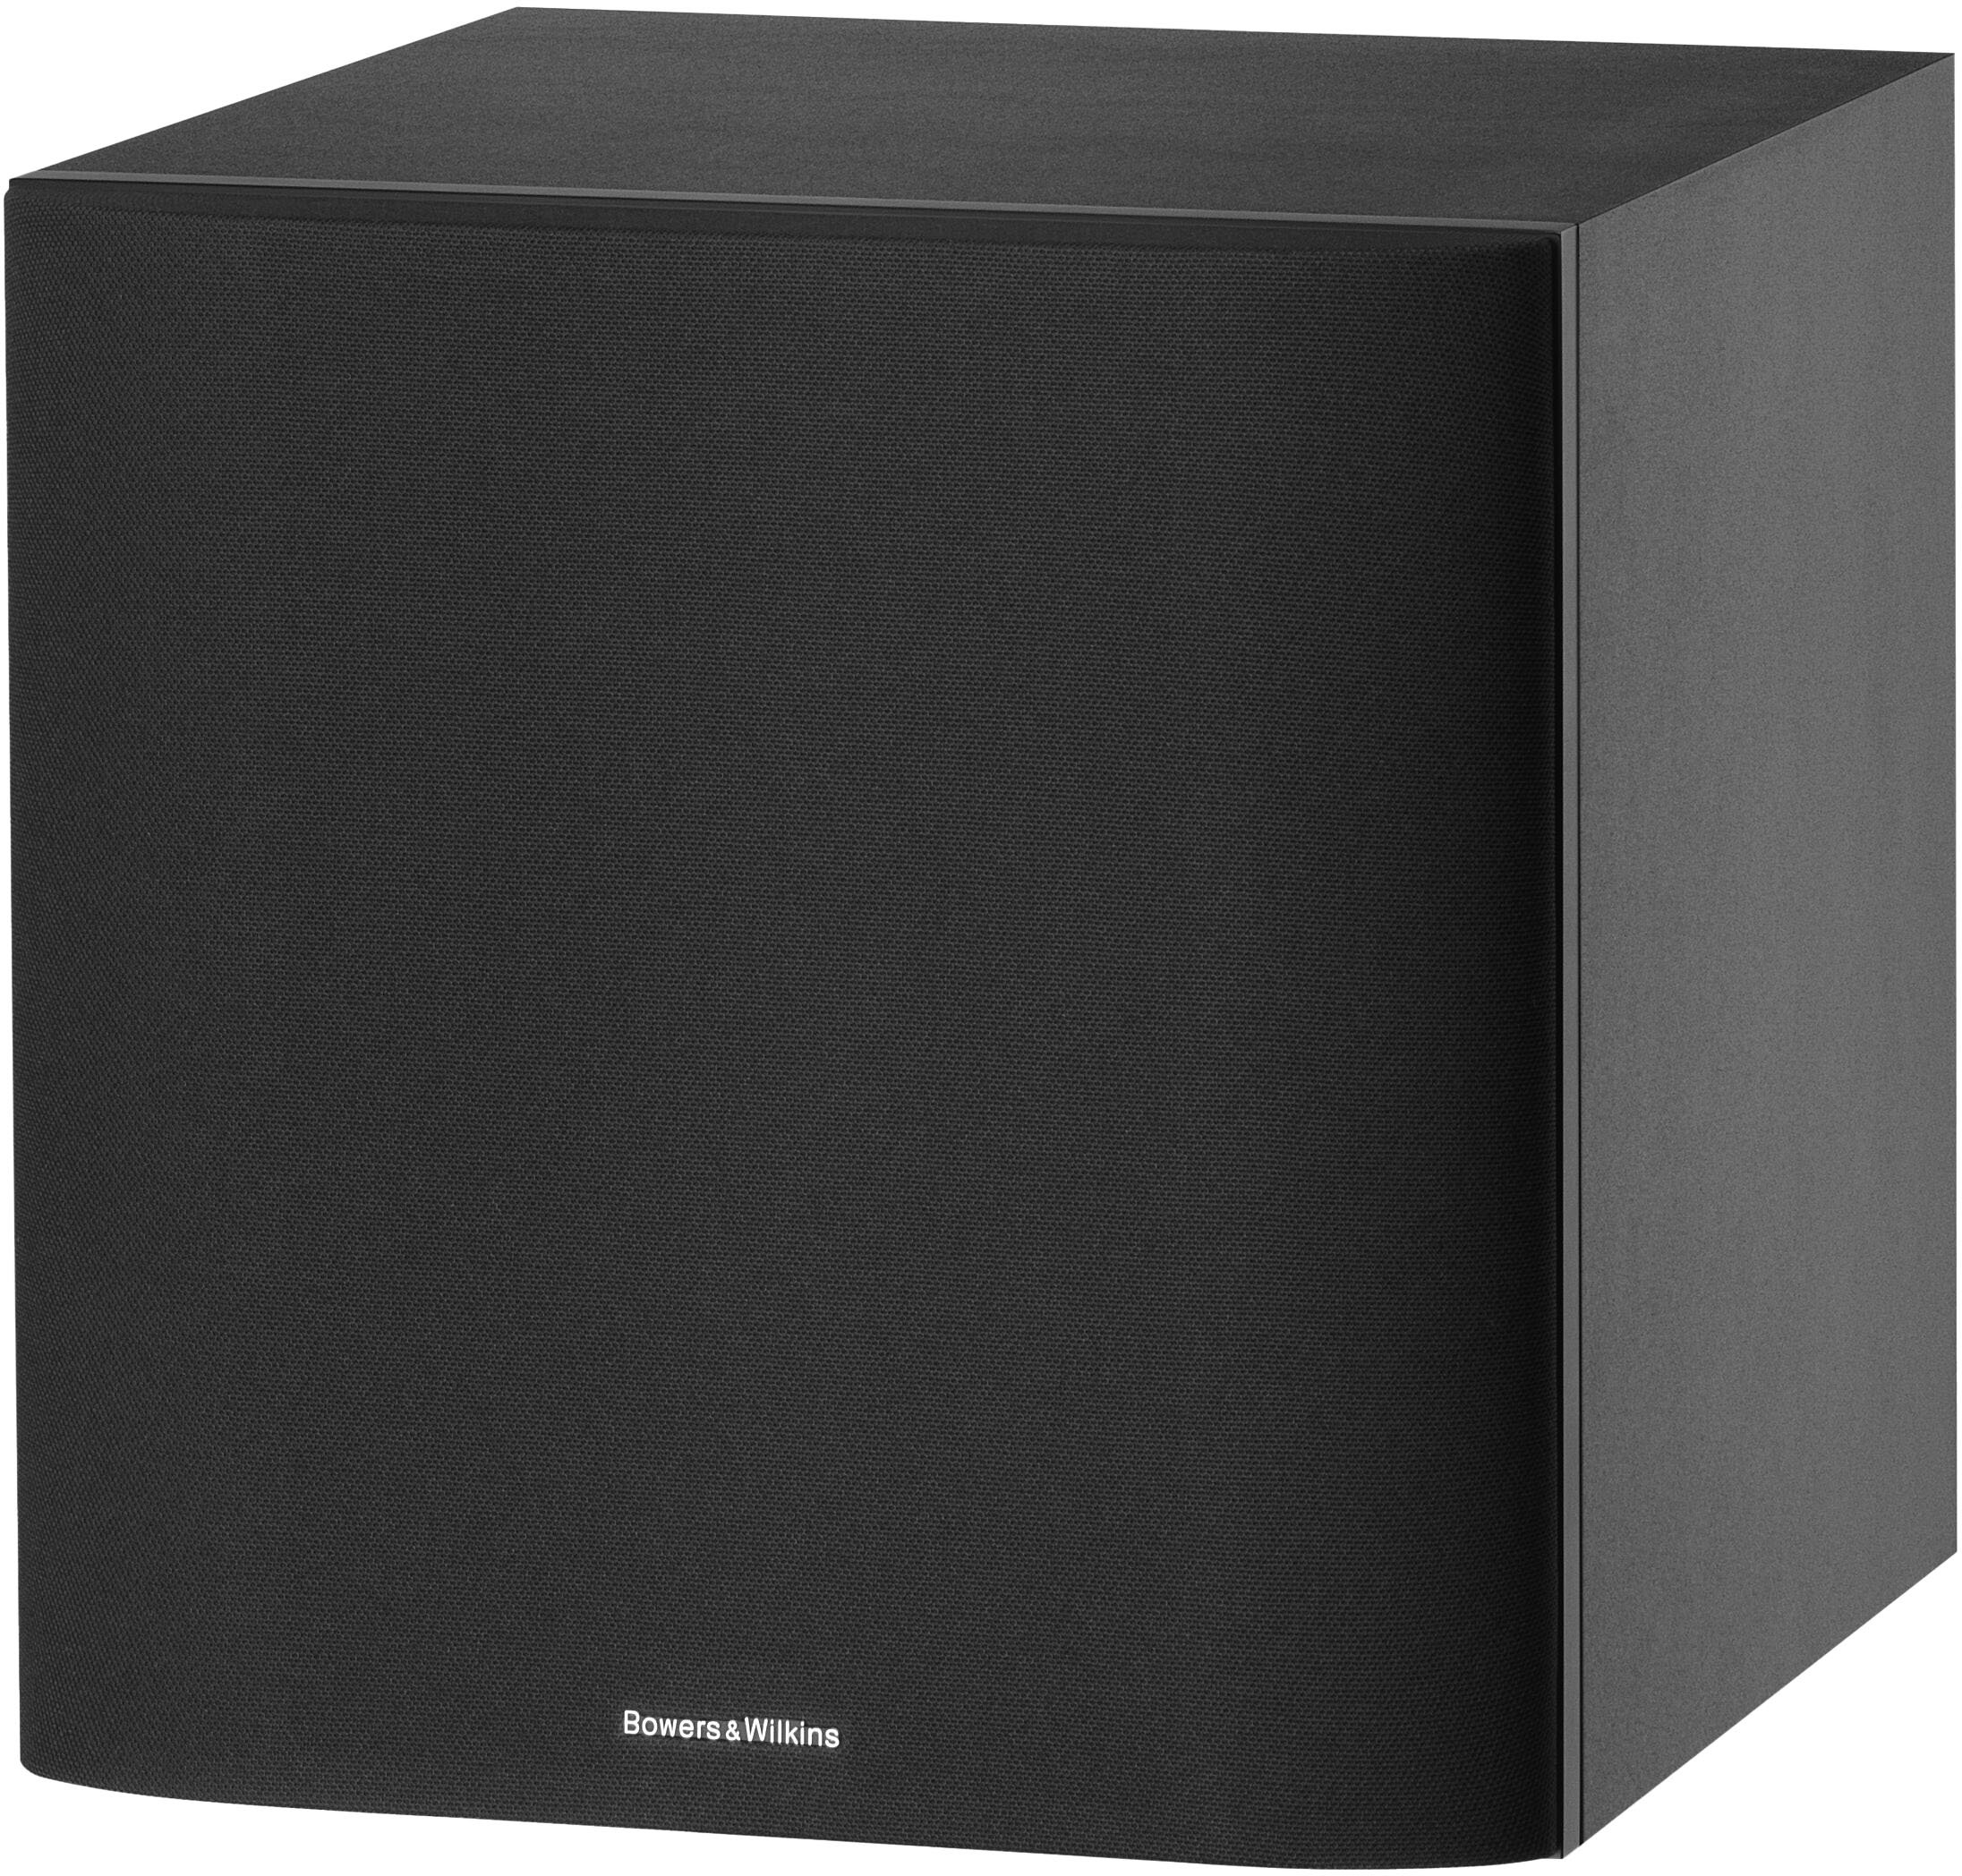 Angle View: MartinLogan - Dynamo 800X 10" 600W Sealed, Powered Subwoofer, with Sub Control App and Wireless Ready - Satin Black